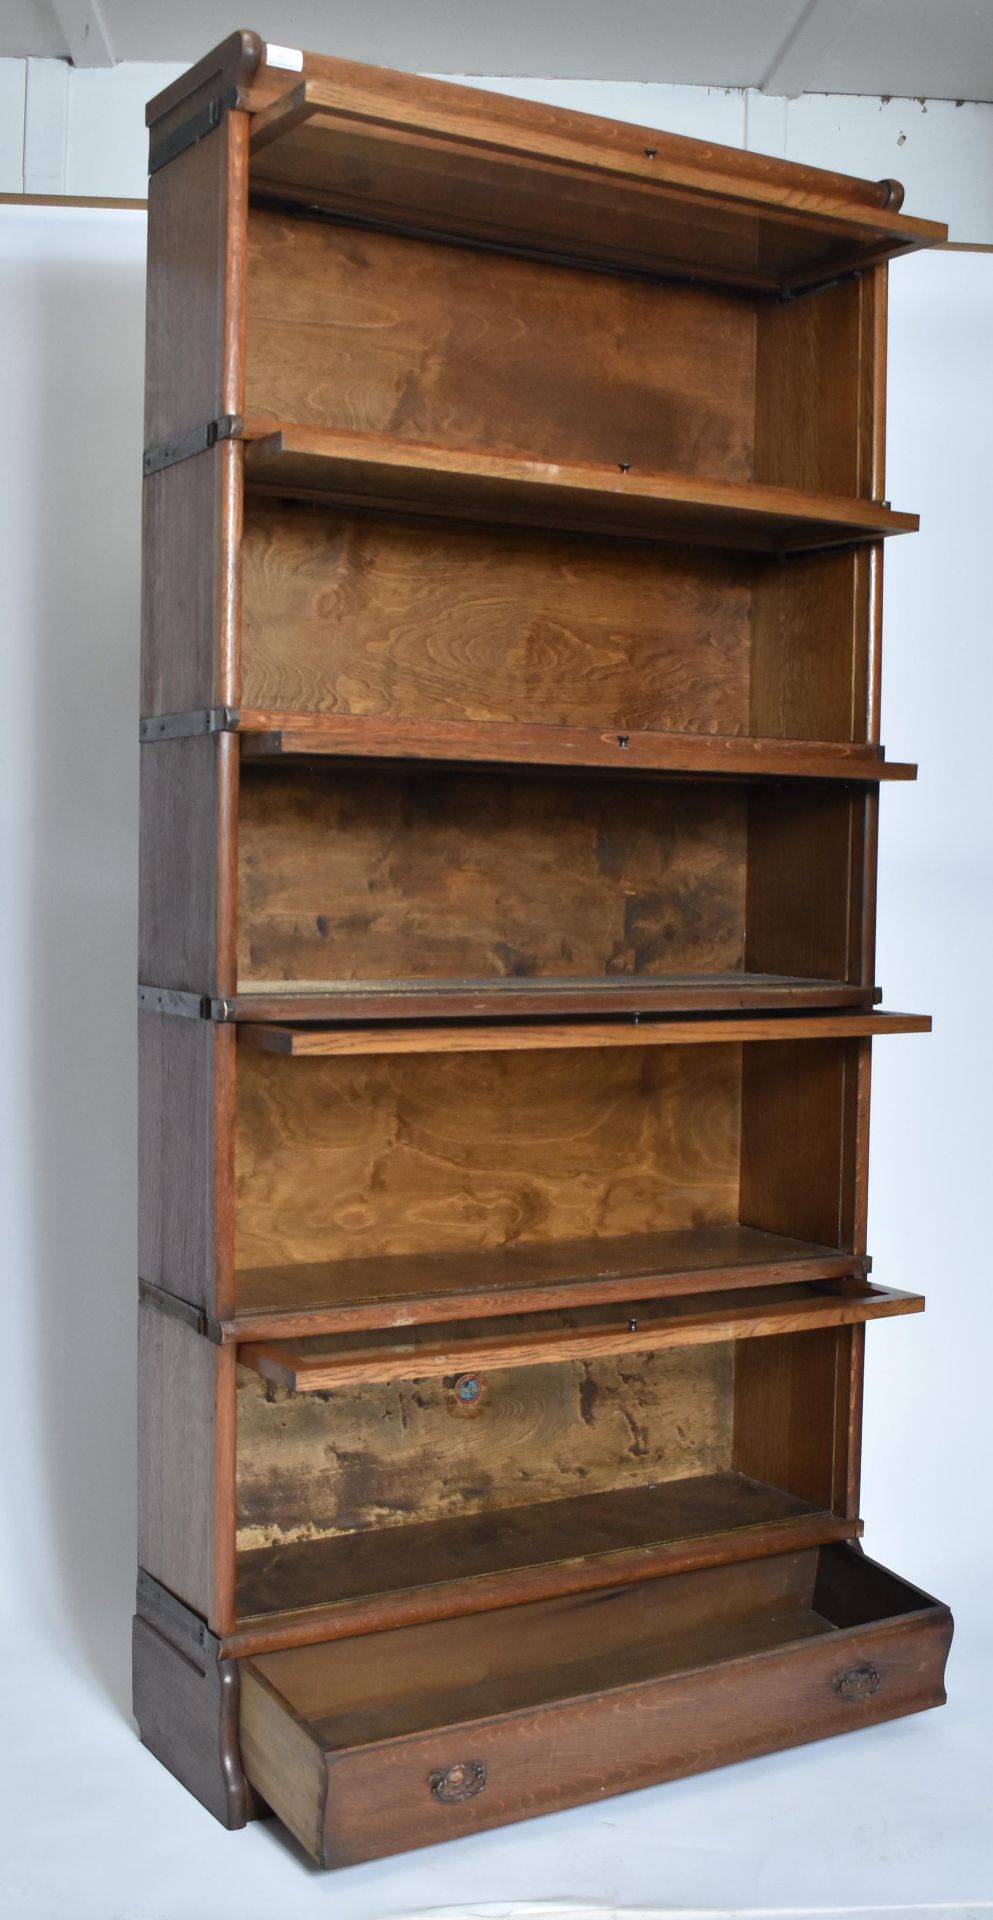 GLOBE WERNICKE - SIX-TIER OAK STACKING LIBRARY BOOKCASE - Image 2 of 7